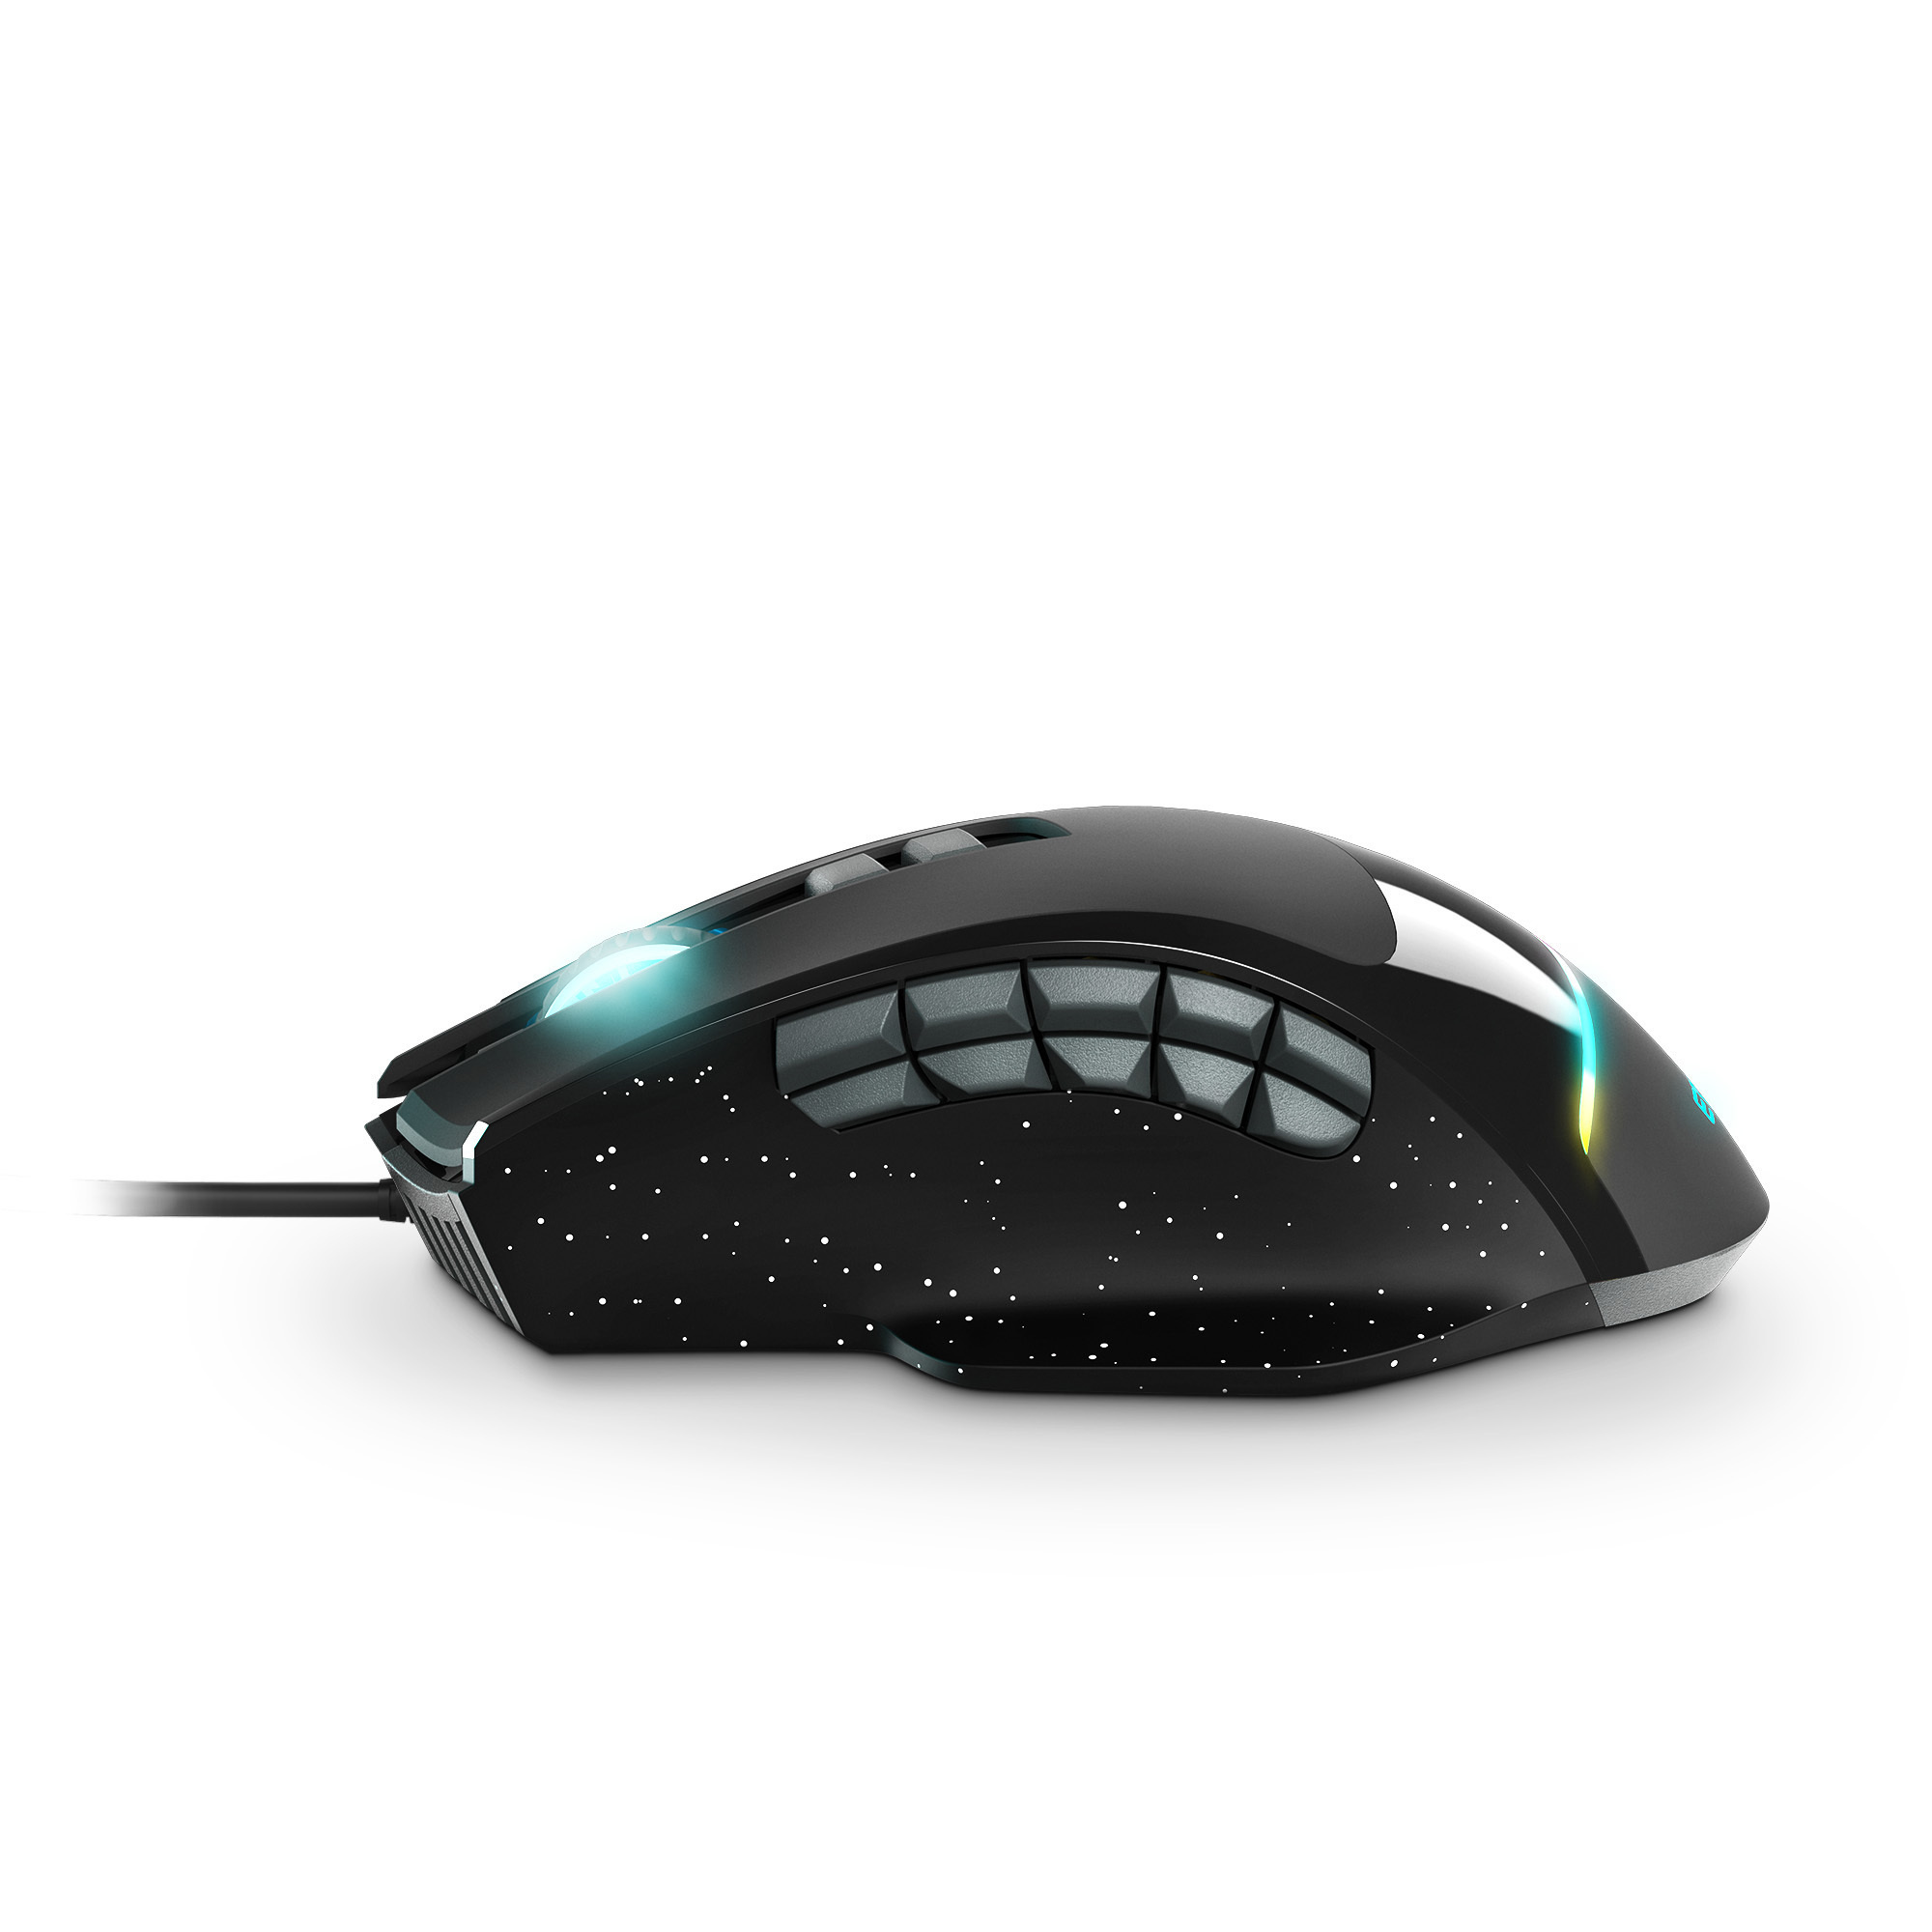 Mouse with removable weights to customise the weight